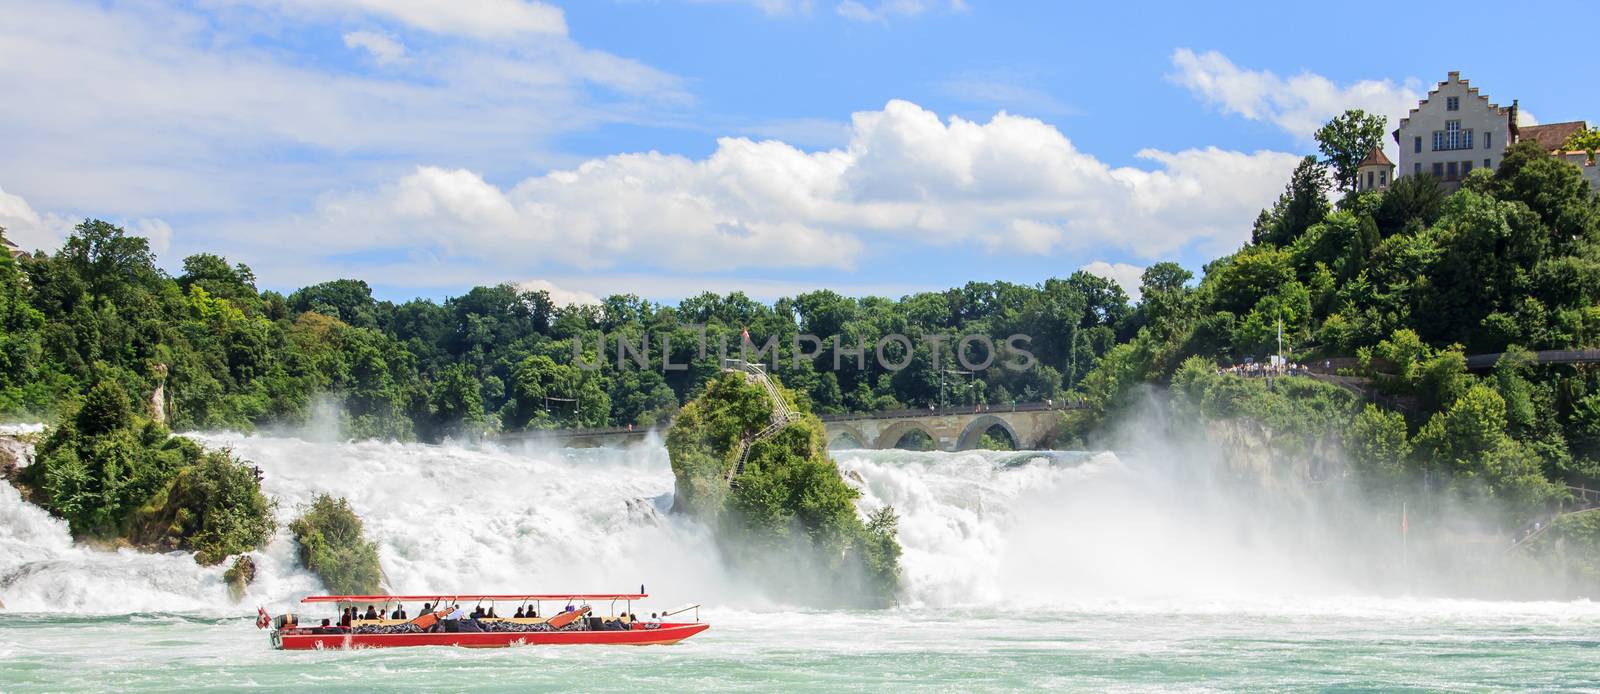 Boat with tourists at Rhine falls, the biggest waterfalls of Europe, in Schaffhausen, Switzerland. by victorflowerfly